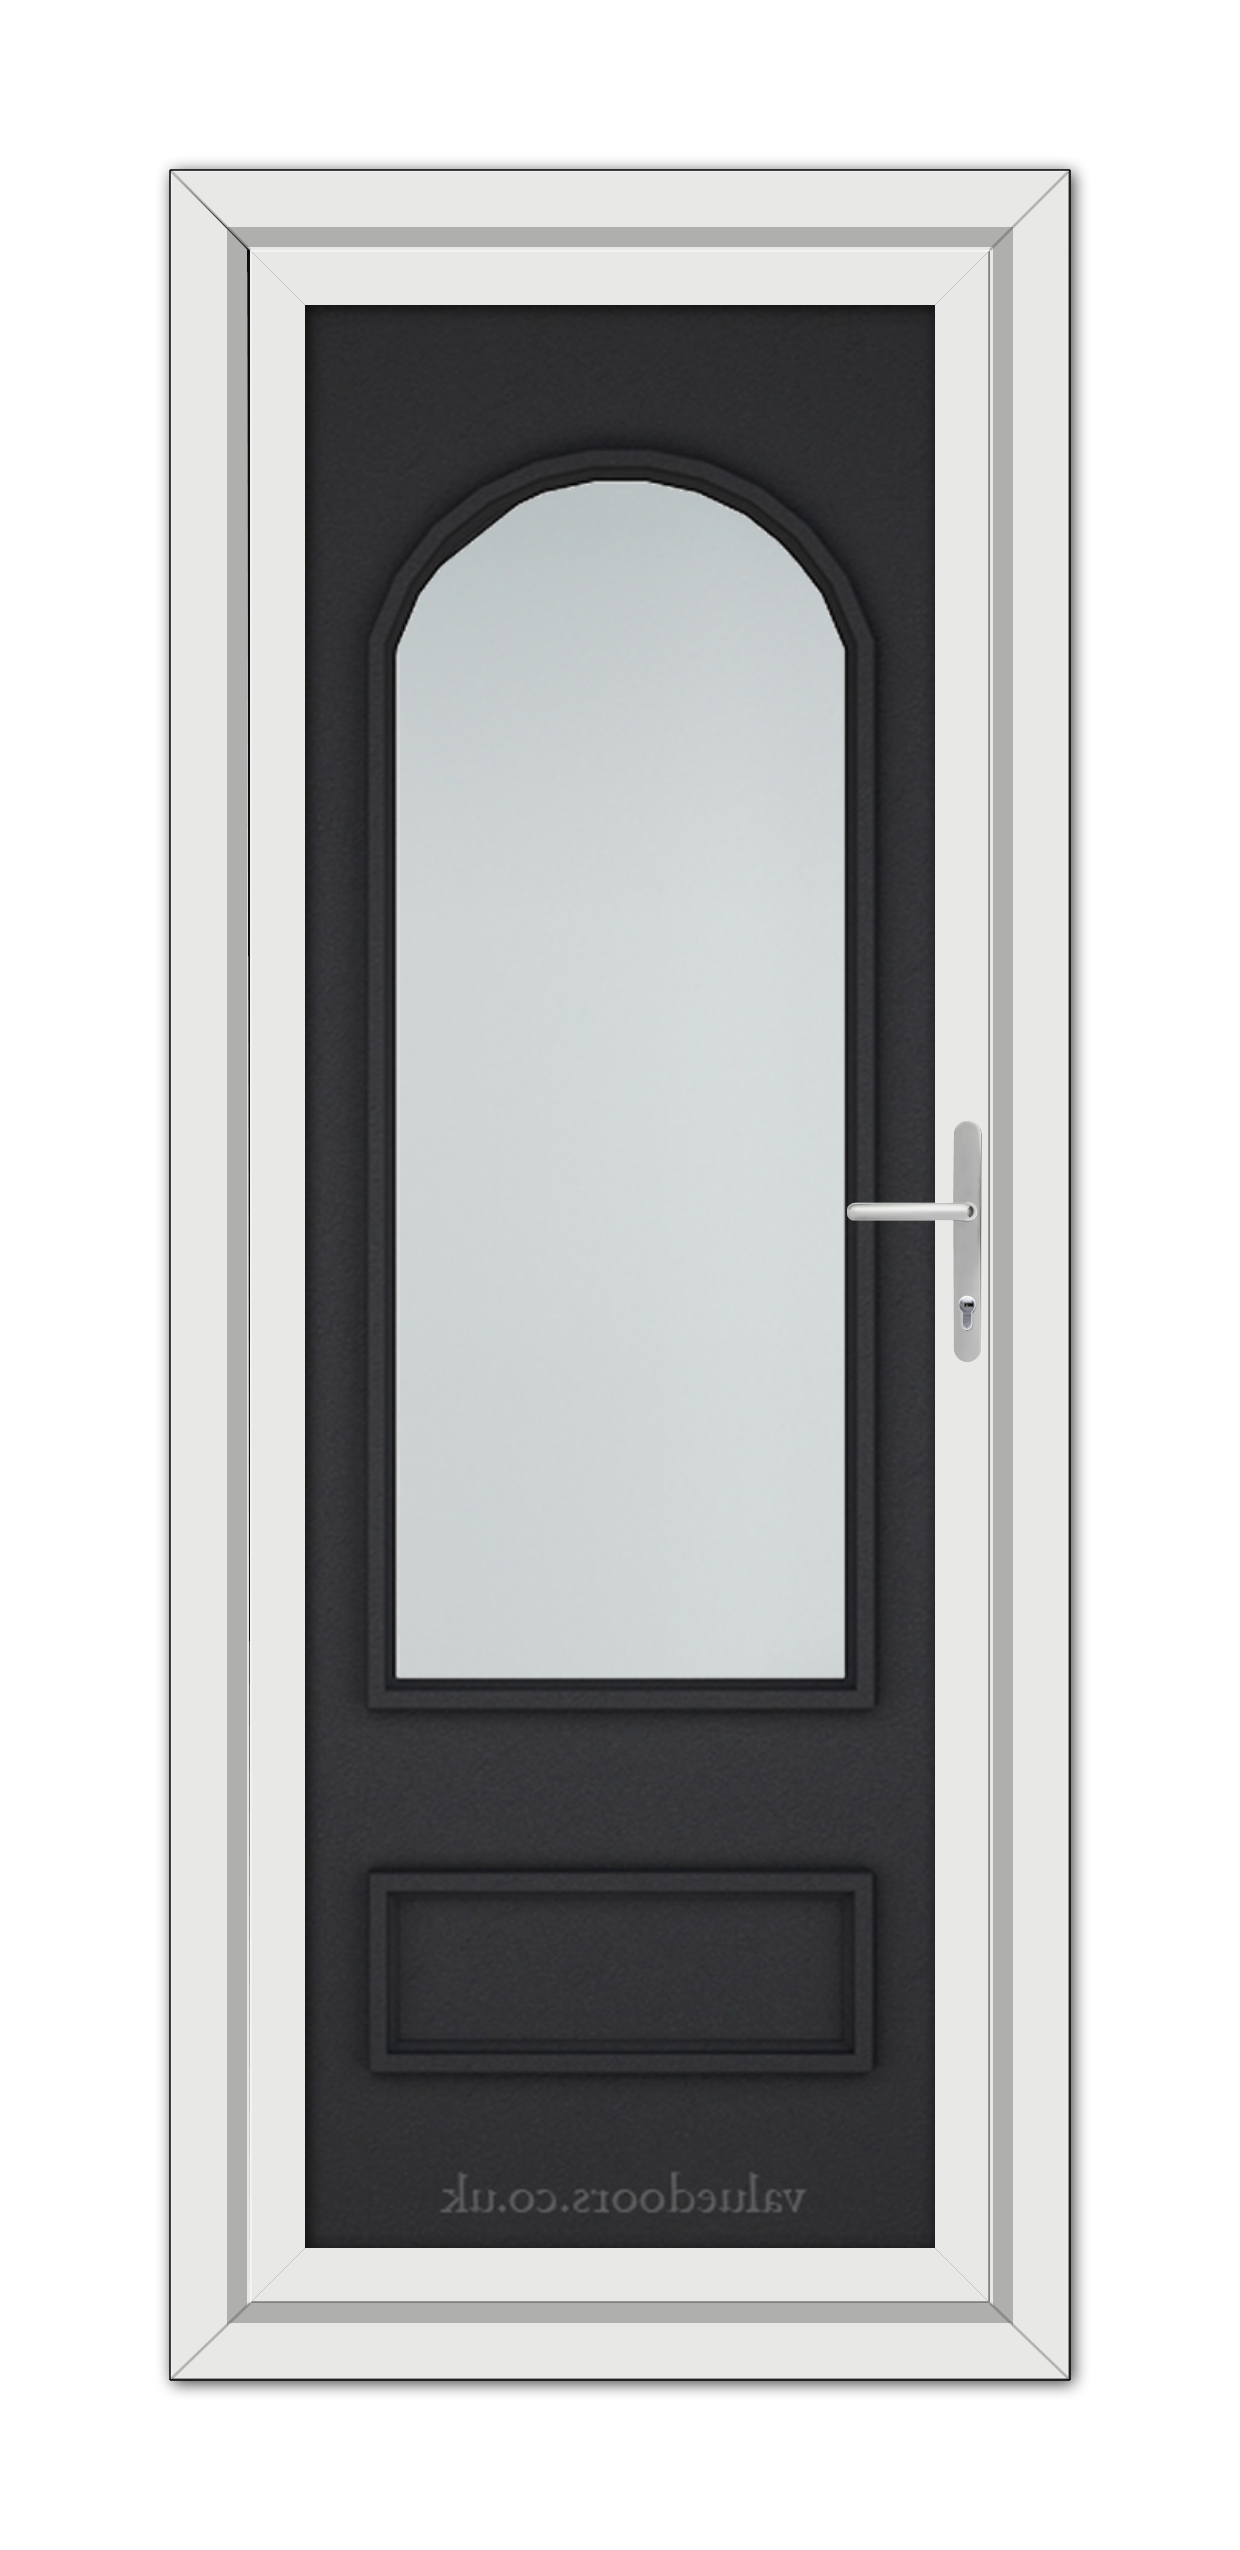 A Black Brown Canterbury uPVC door with a gray panel and an arched, clear glass window at the top, featuring a sleek silver handle on the right.